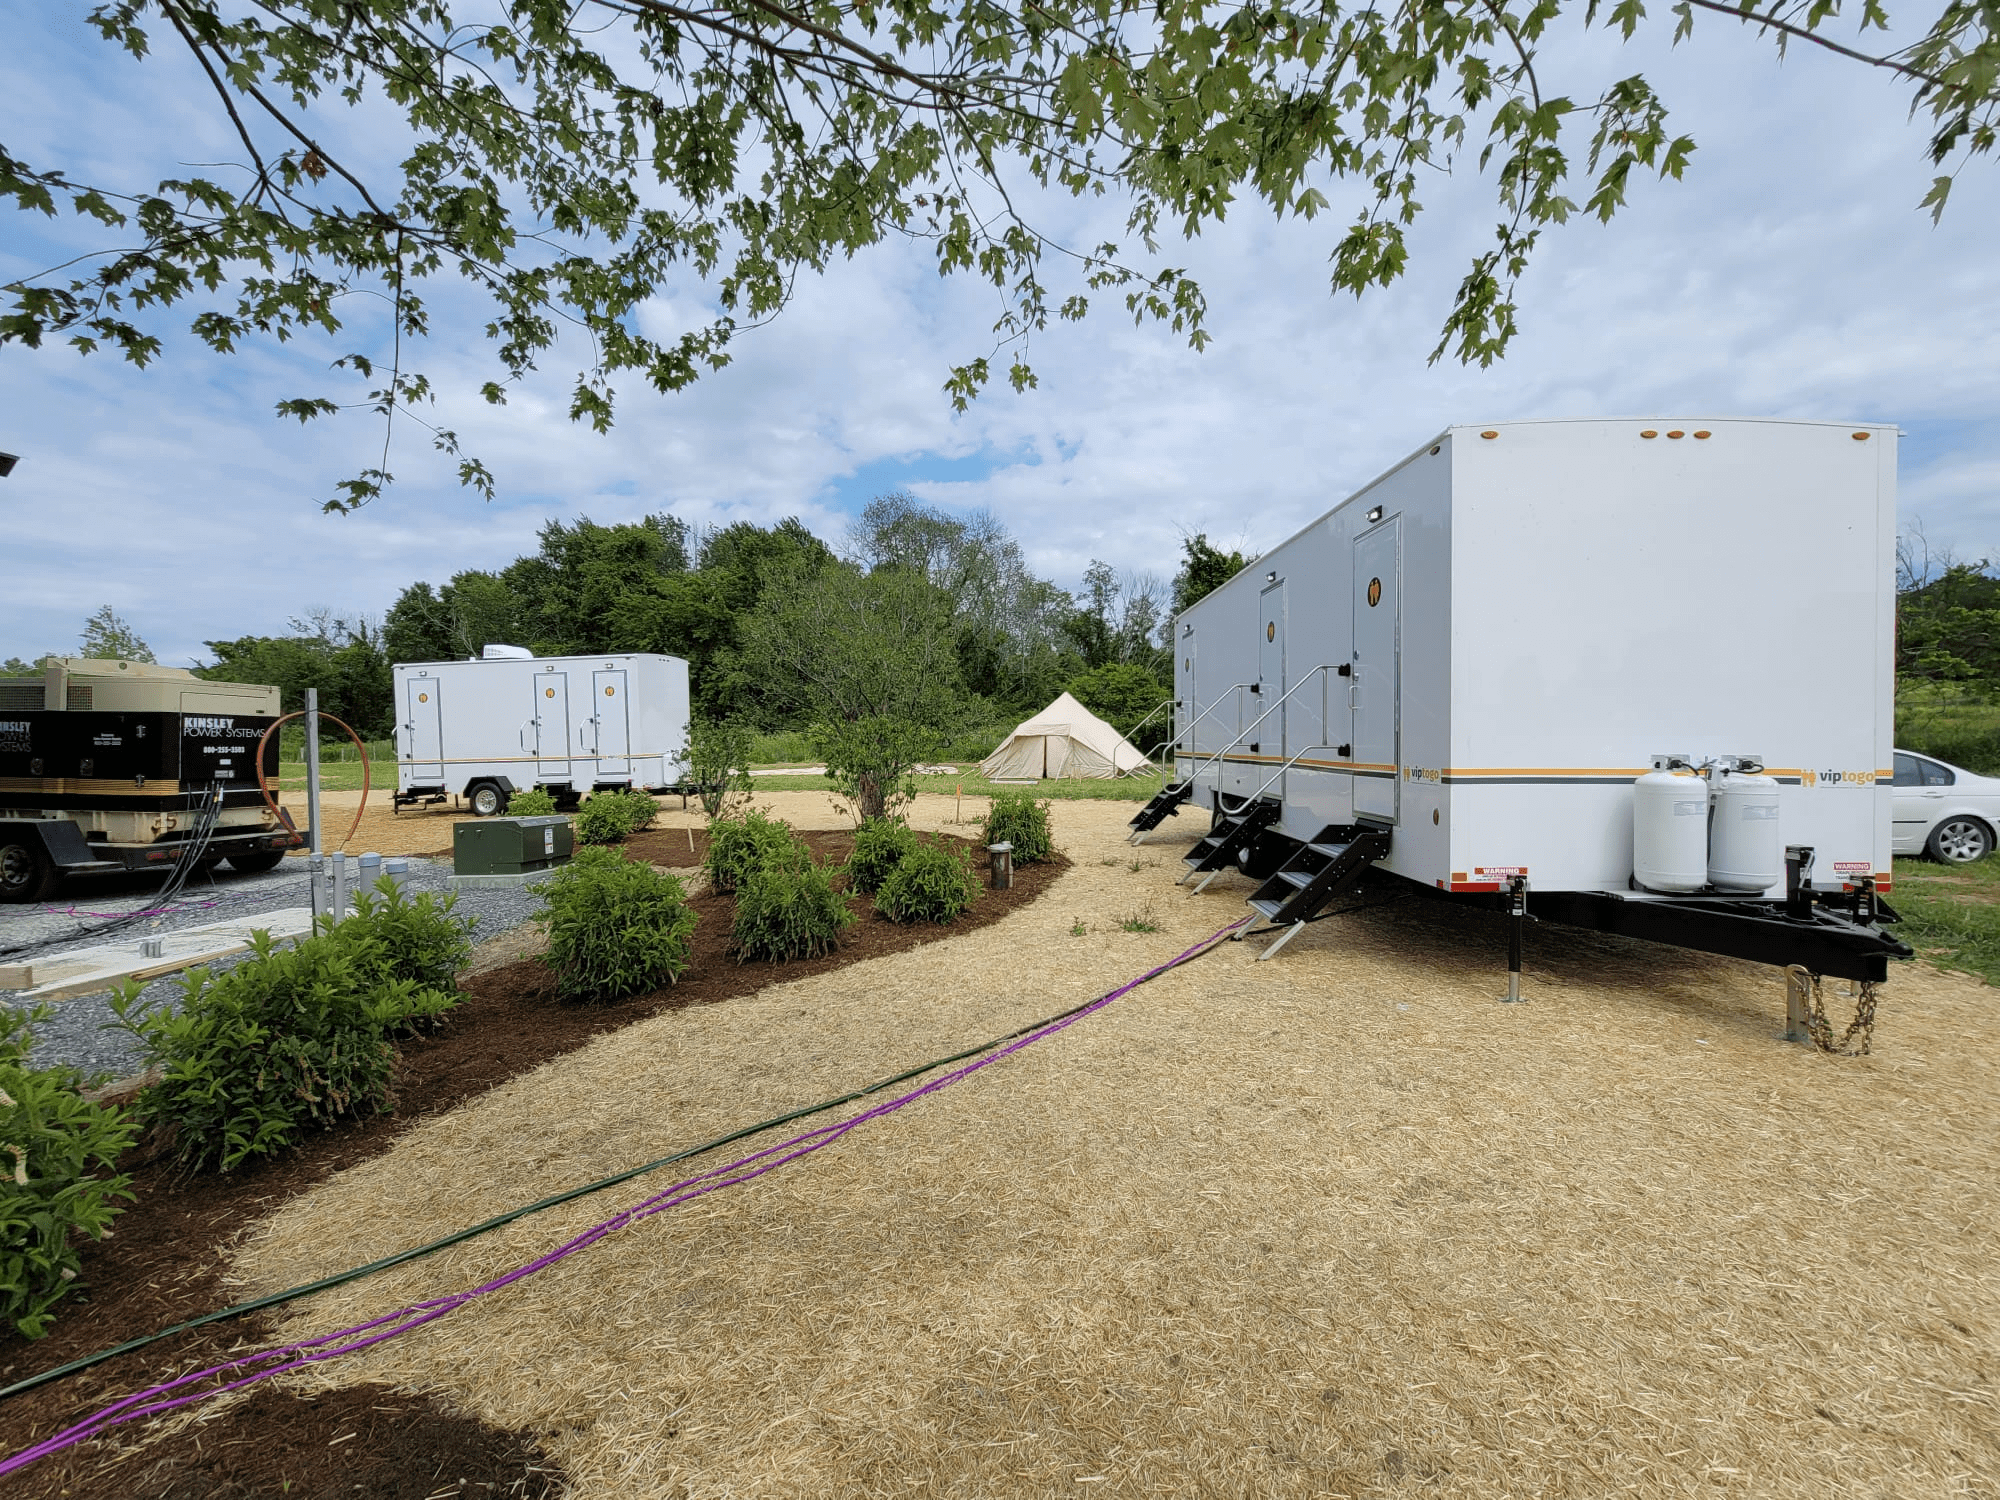 view of portable shower rental trailers at campsite